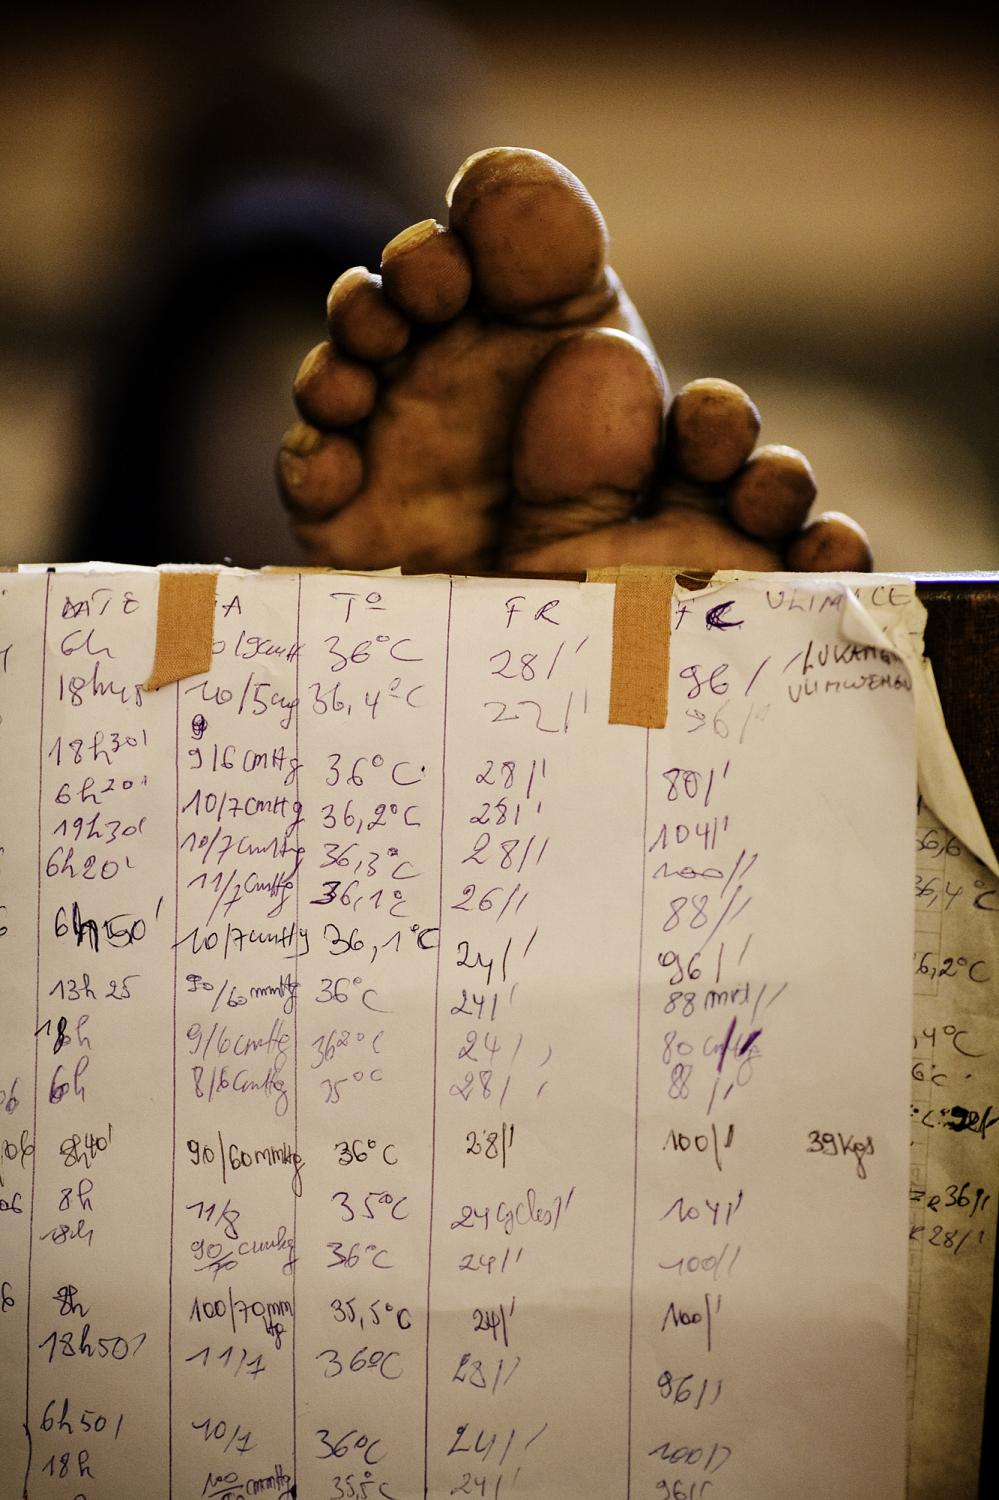 DEMOCRATIC REPUBLIC OF CONGO Bukavu, South Kivu Province A hospital chart is taped to the end of a bed near the feet of a resting AIDS patient at...